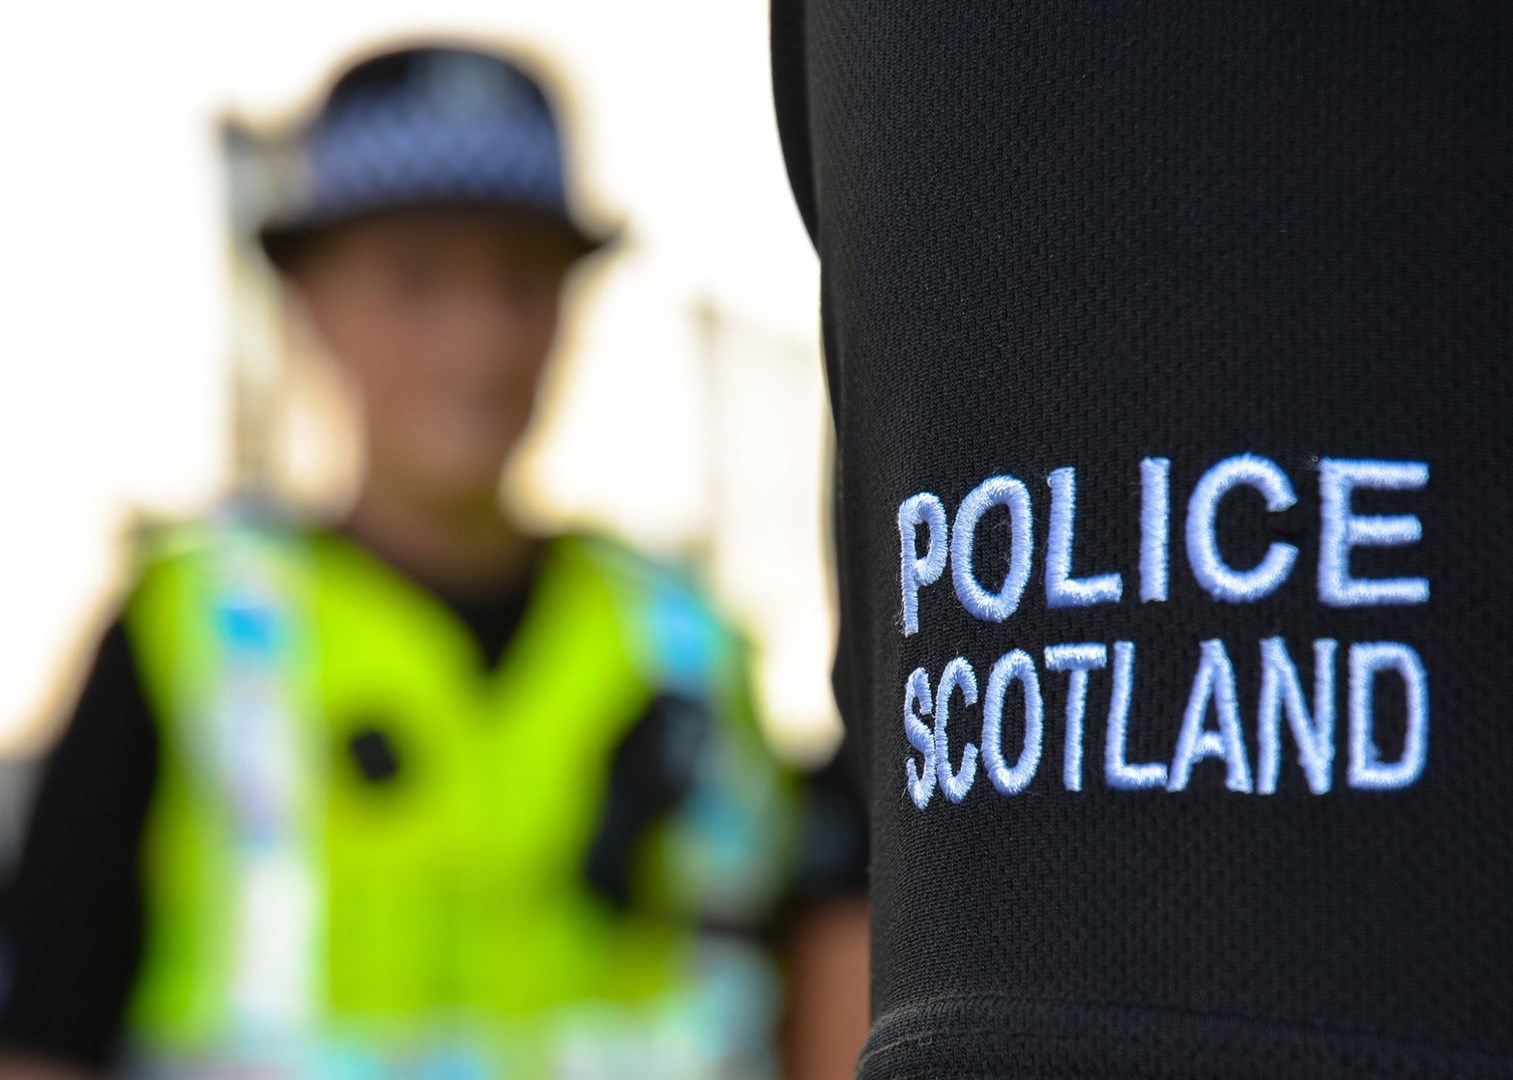 Police say the local community has grown increasingly concerned following incidents involving groups around Lossiemouth High School.